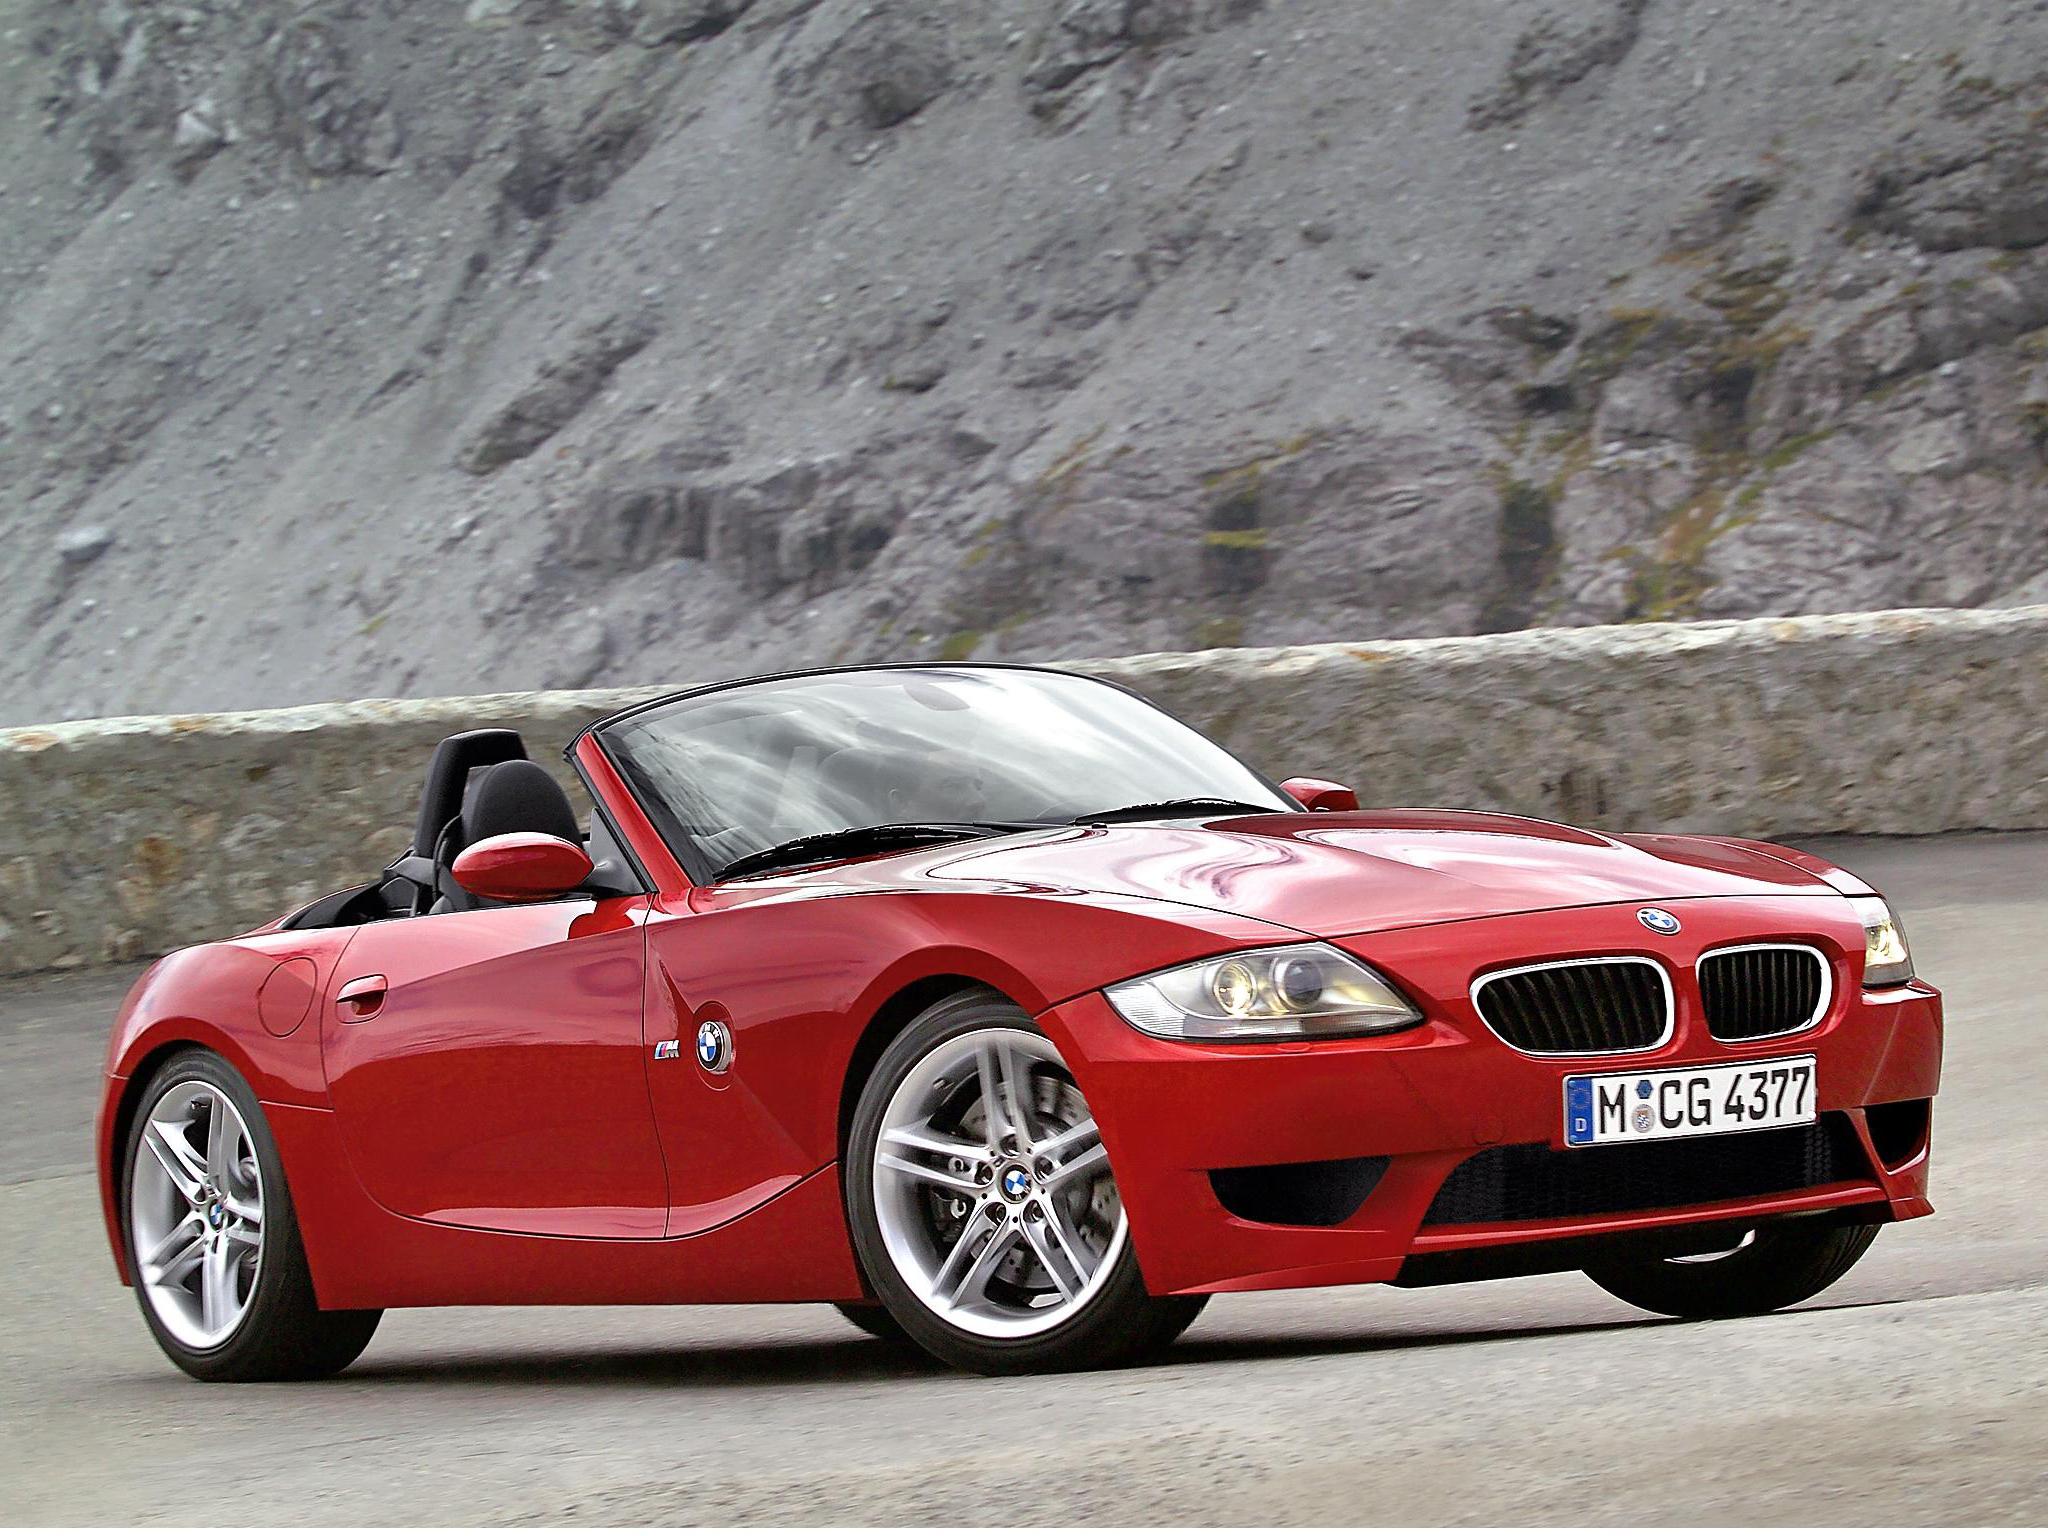 The BMW Z4 remains a head turner